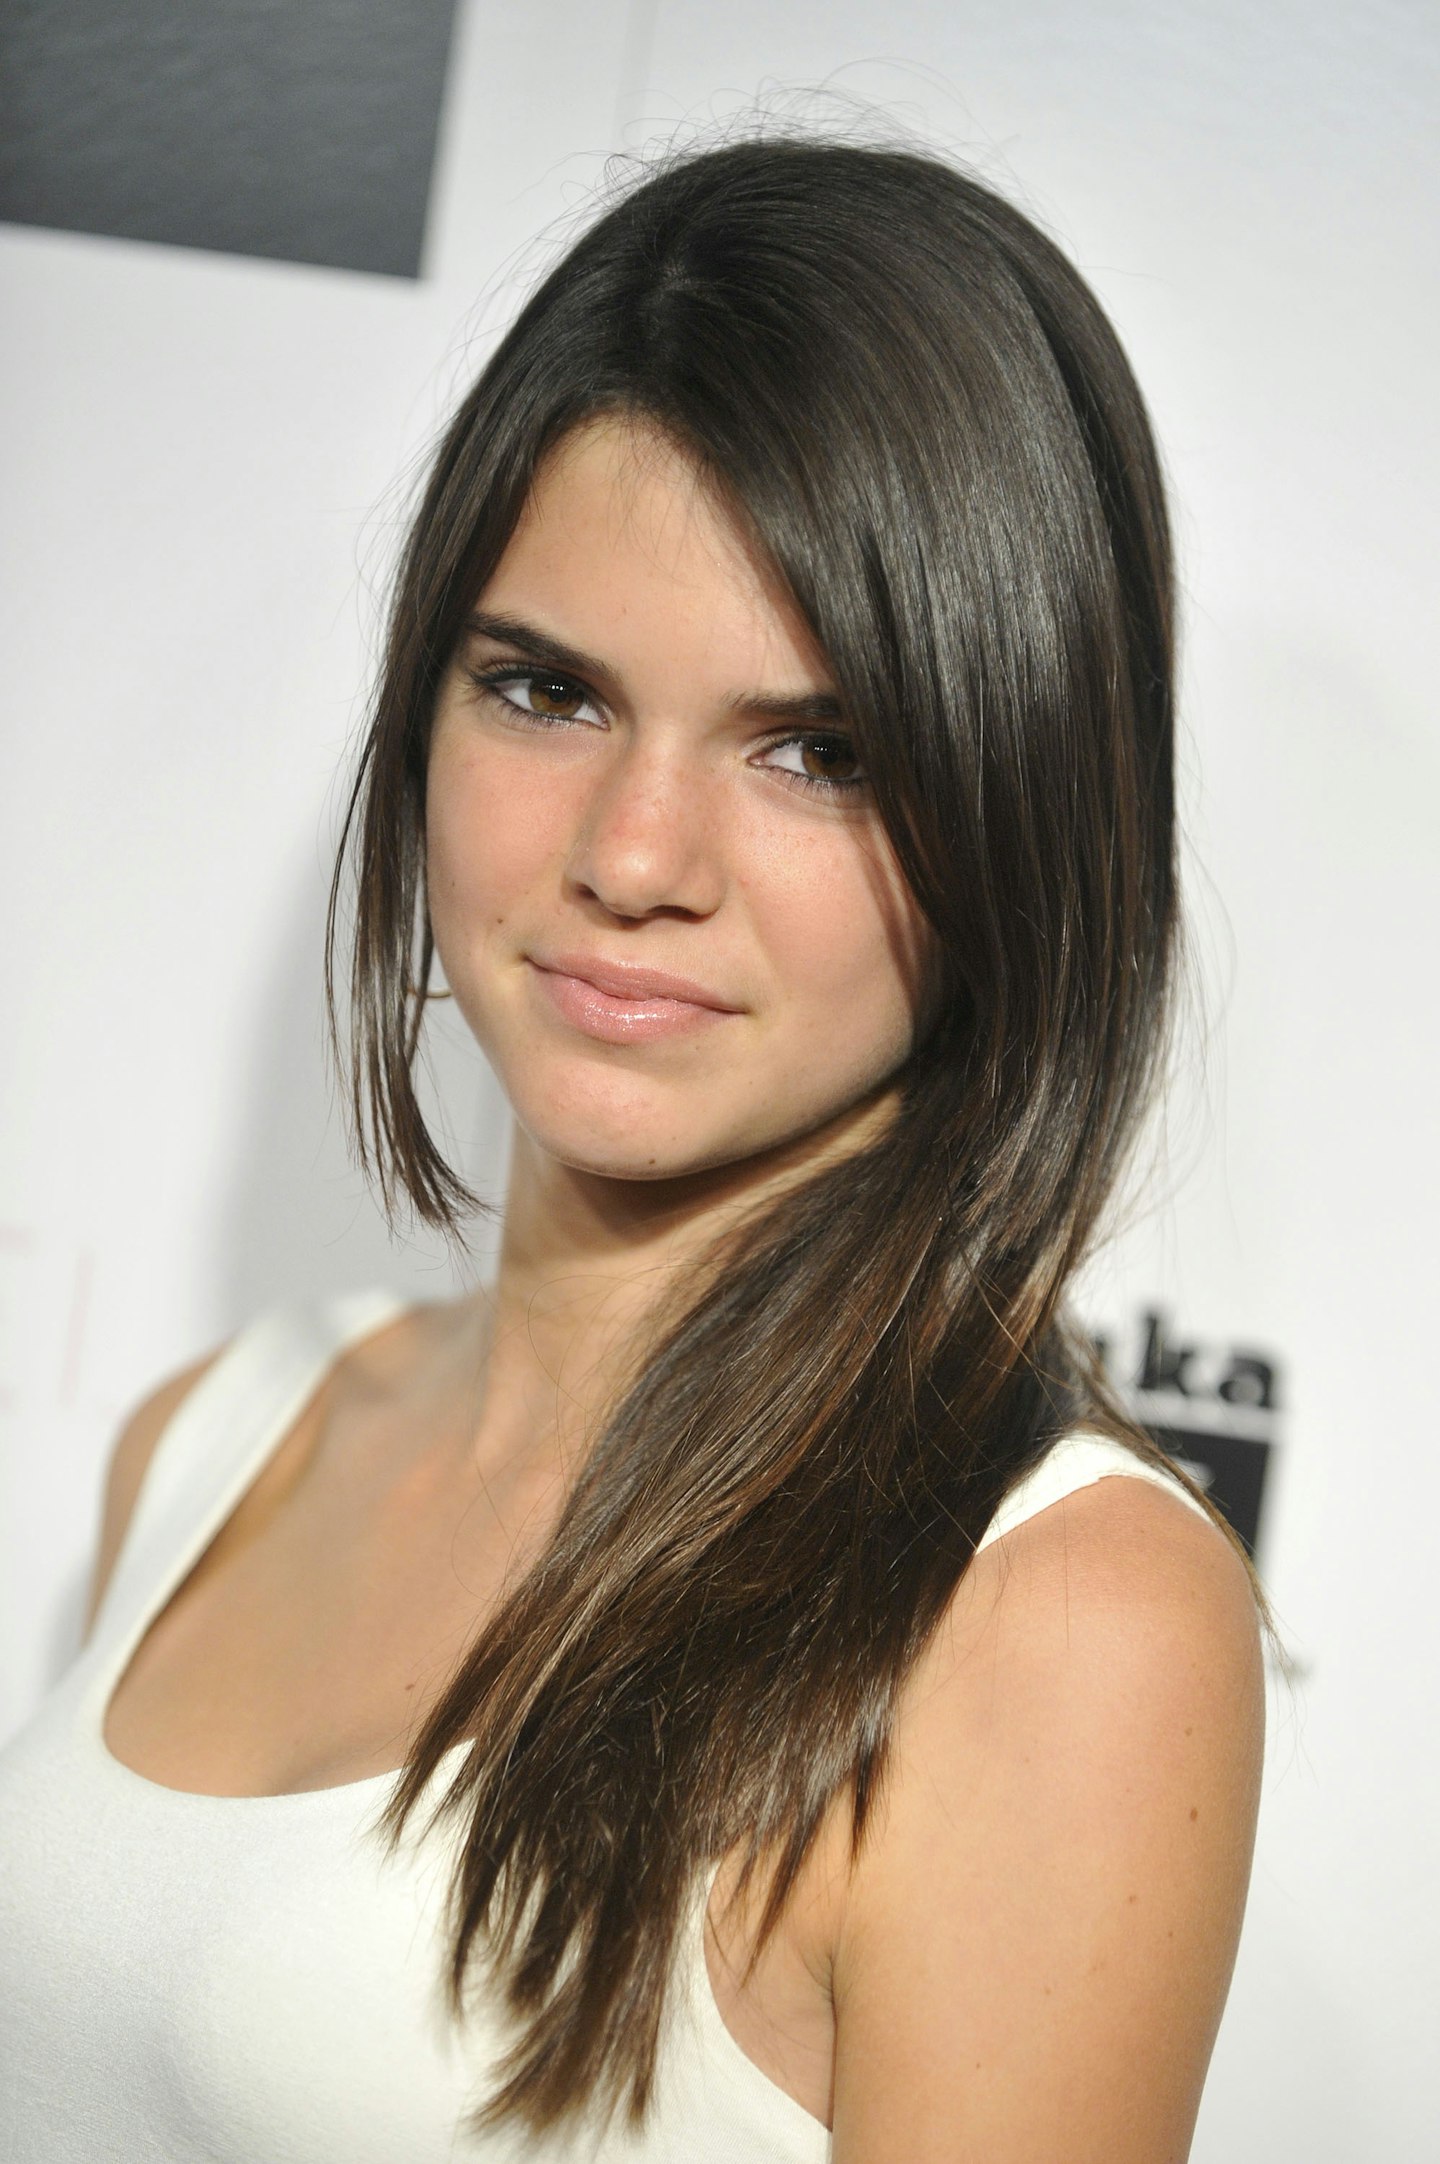 Kendall Jenner 2009 (age 13)